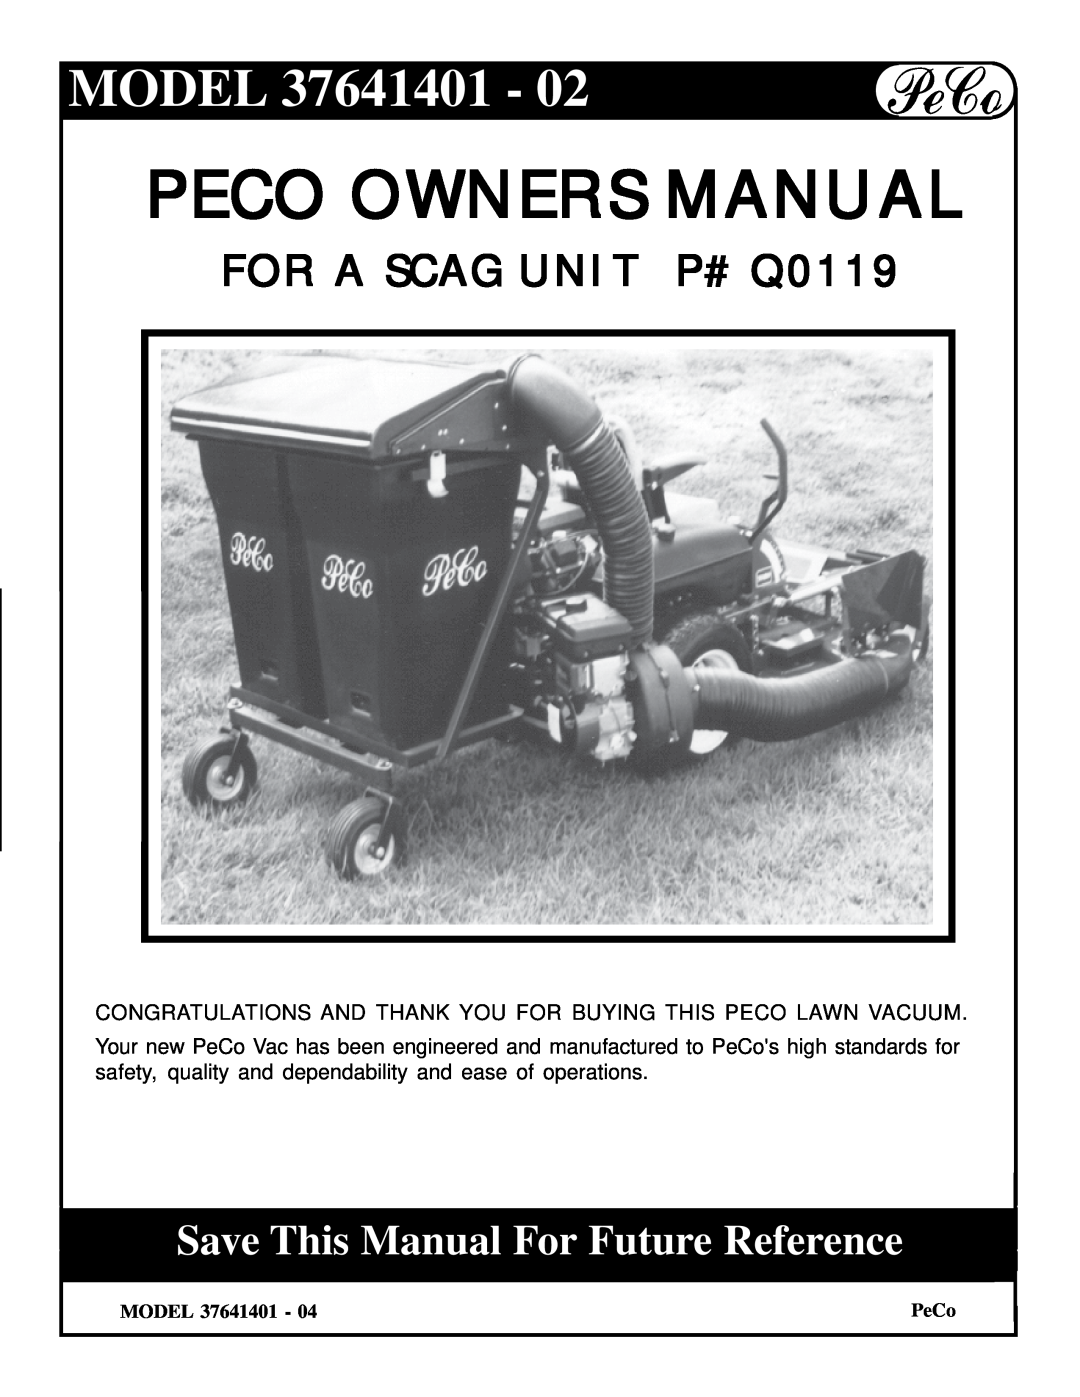 Briggs & Stratton owner manual MODEL 37641401, Save This Manual For Future Reference, Peco Owners Manual, PeCo 